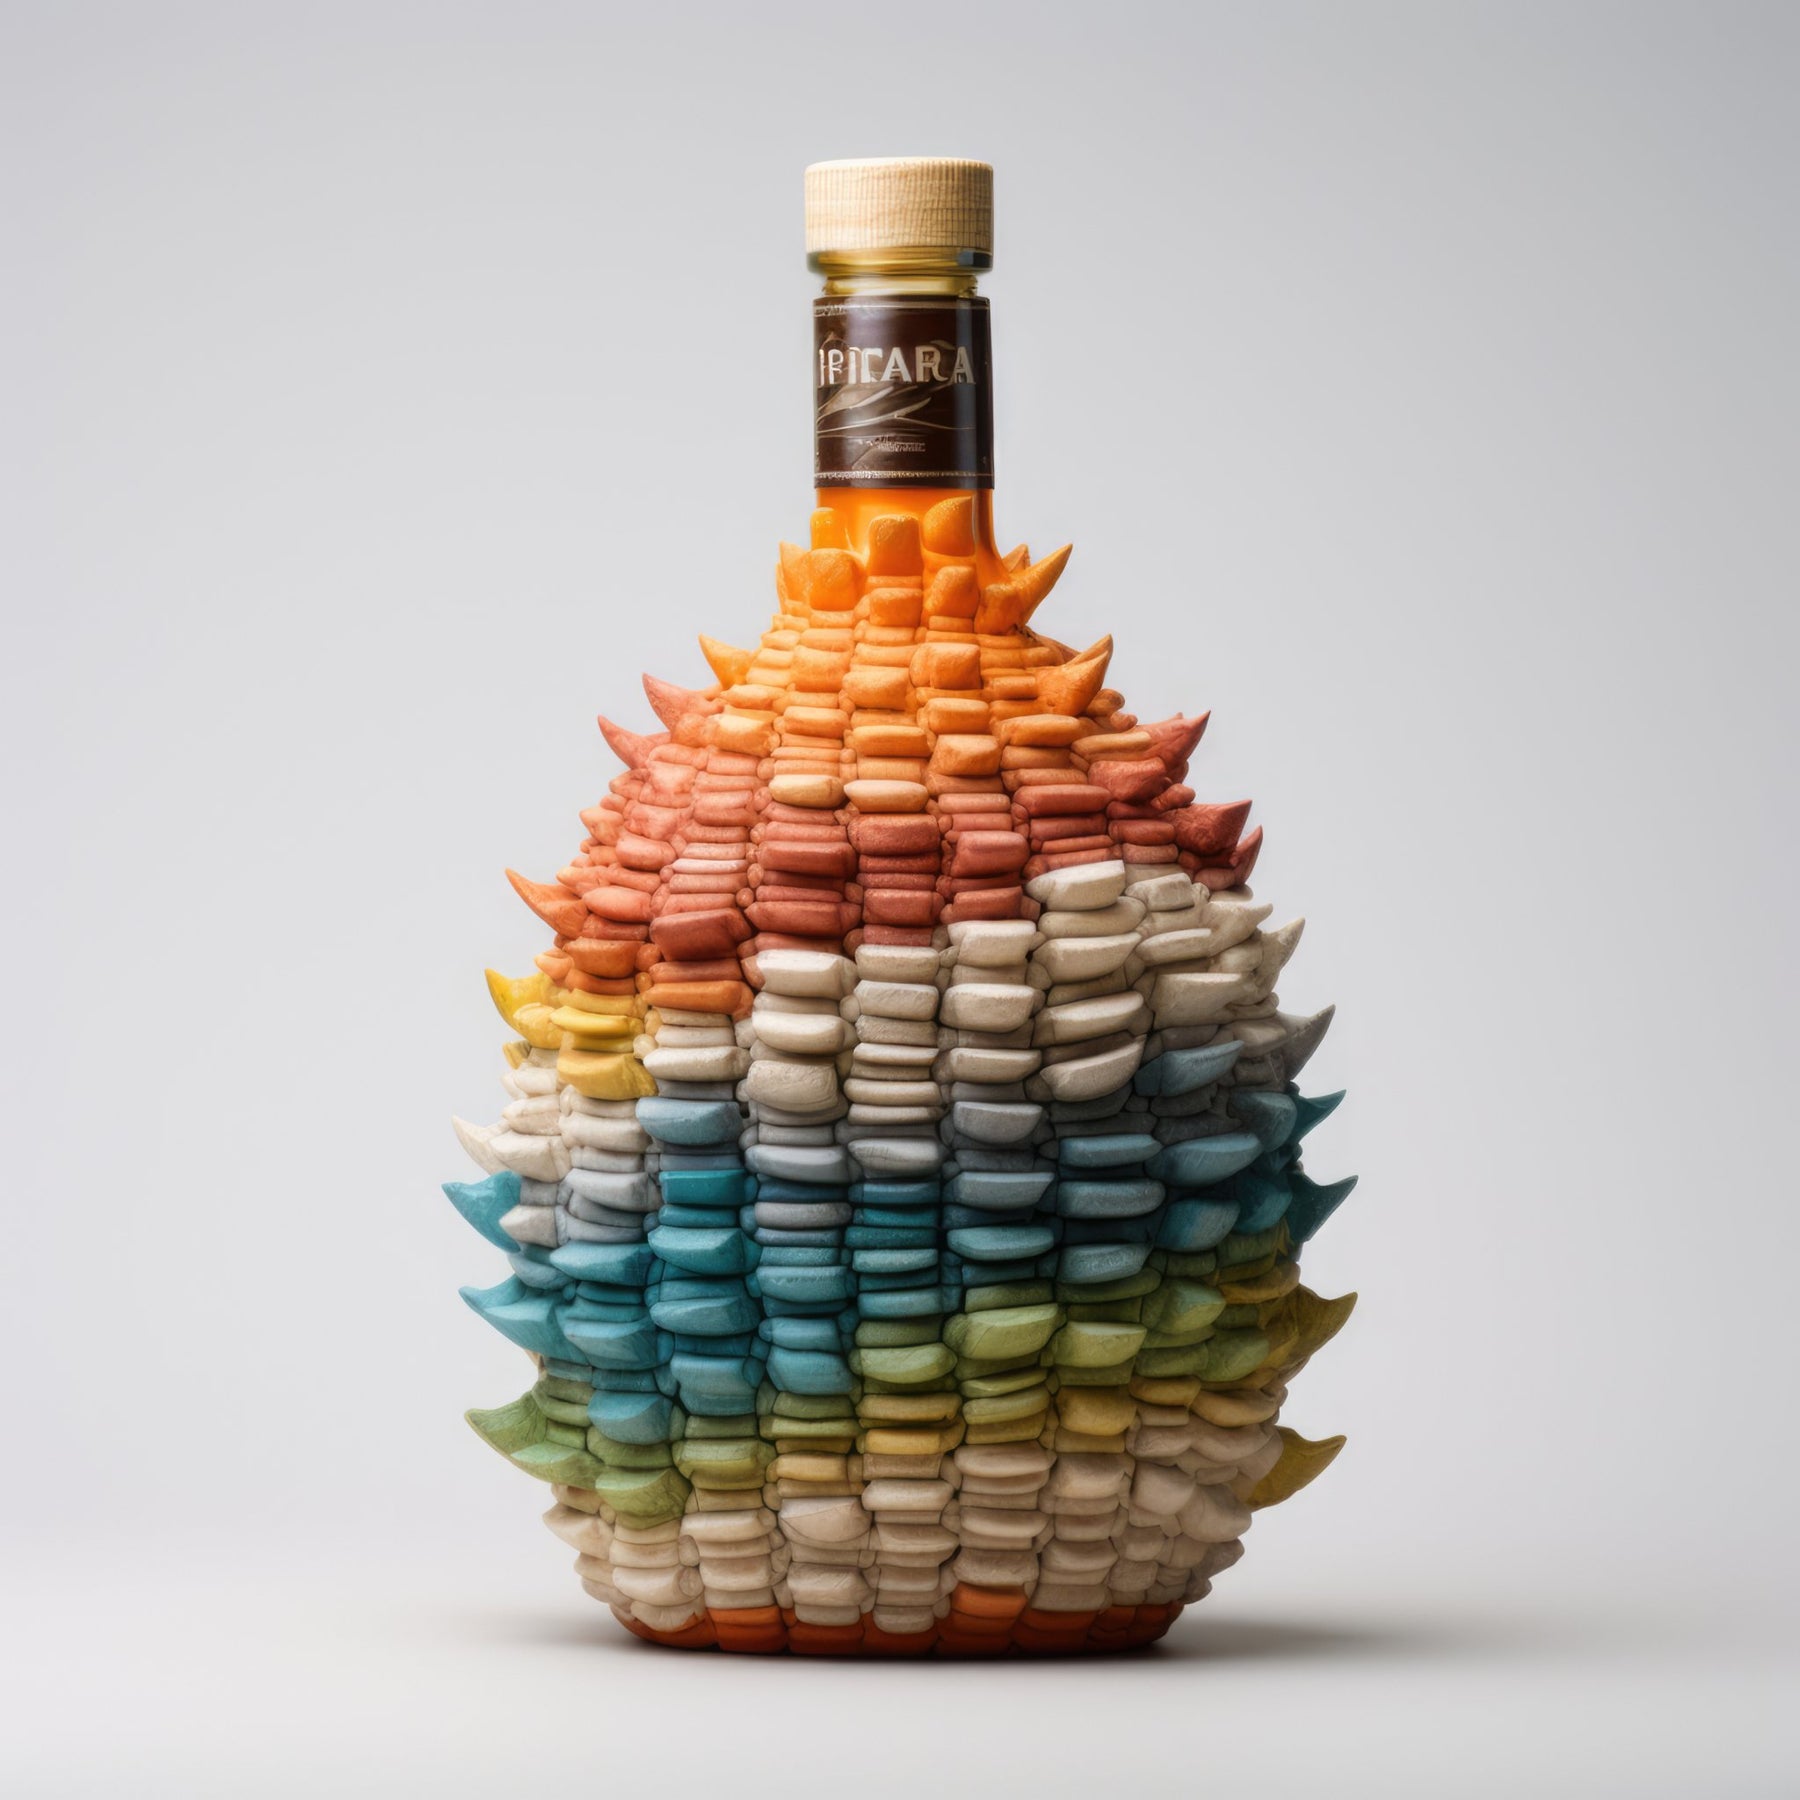 Piñata Resembling A Bottle Of Tequila Or Mezcal - Mexicada